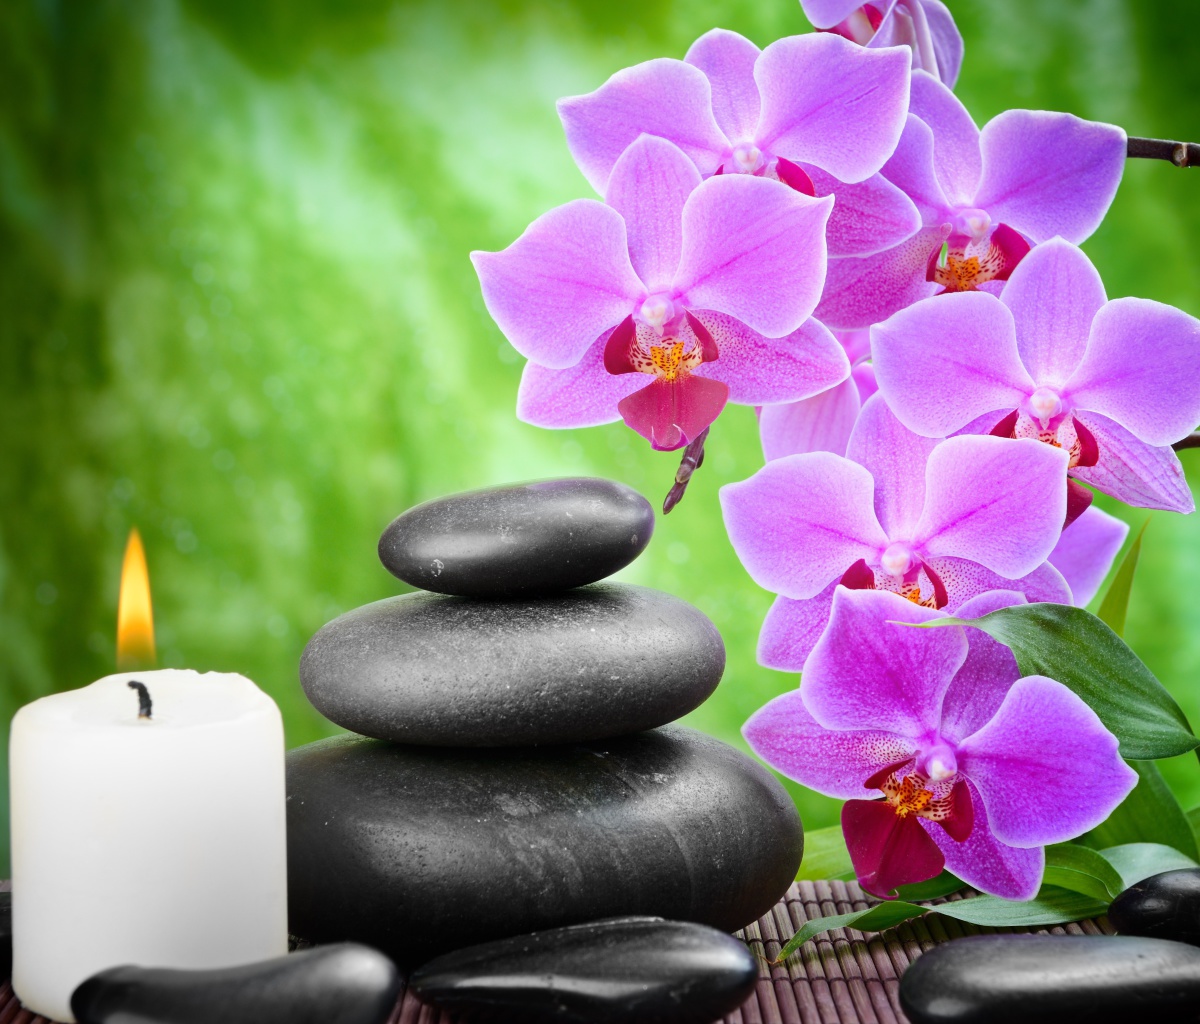 Pebbles, candles and orchids screenshot #1 1200x1024